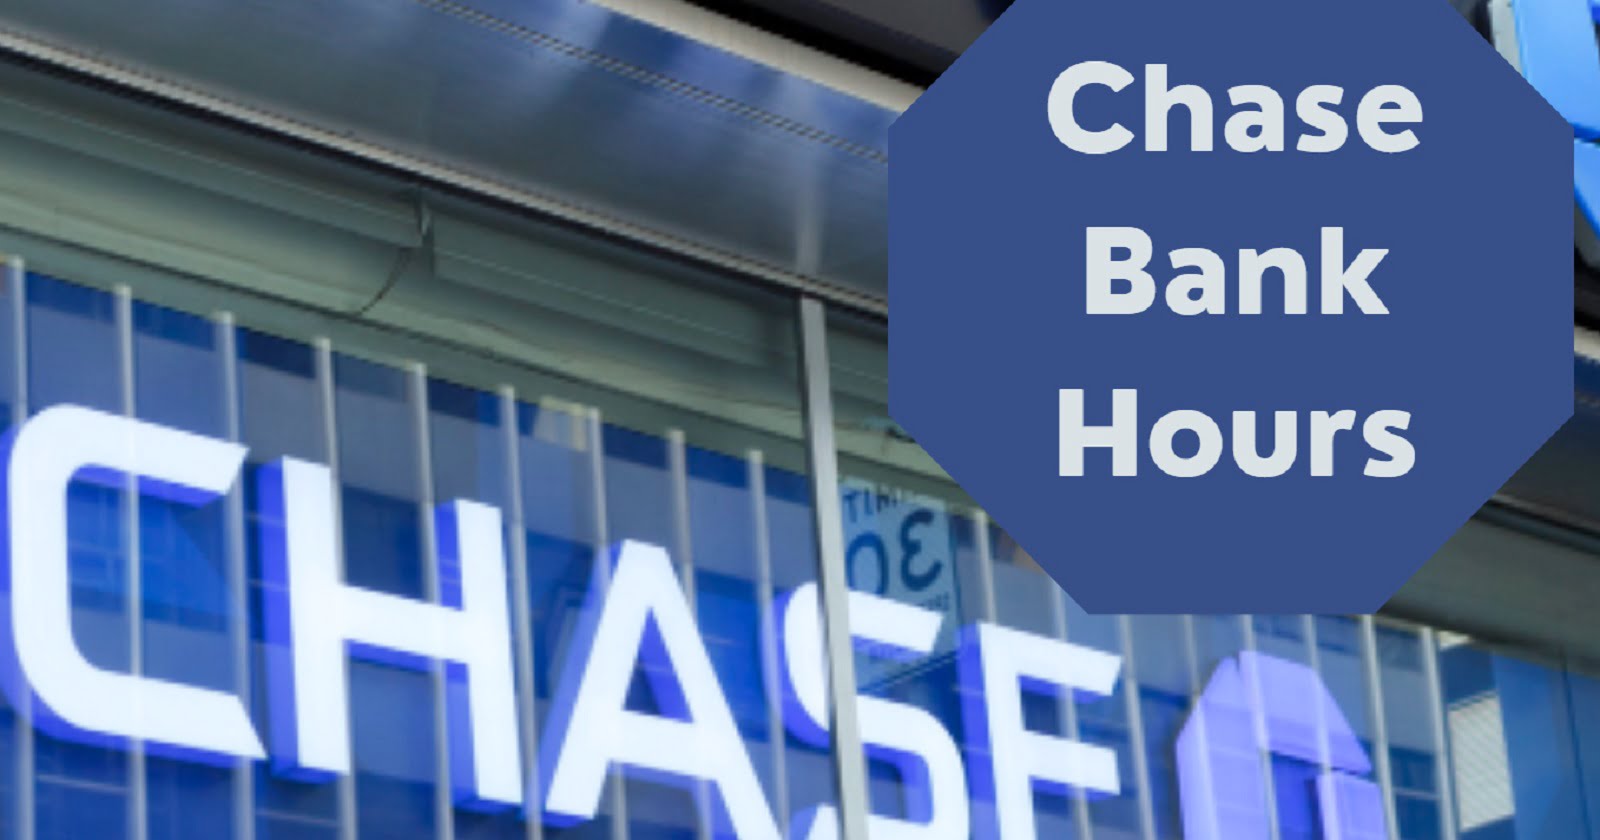 chase bank hours